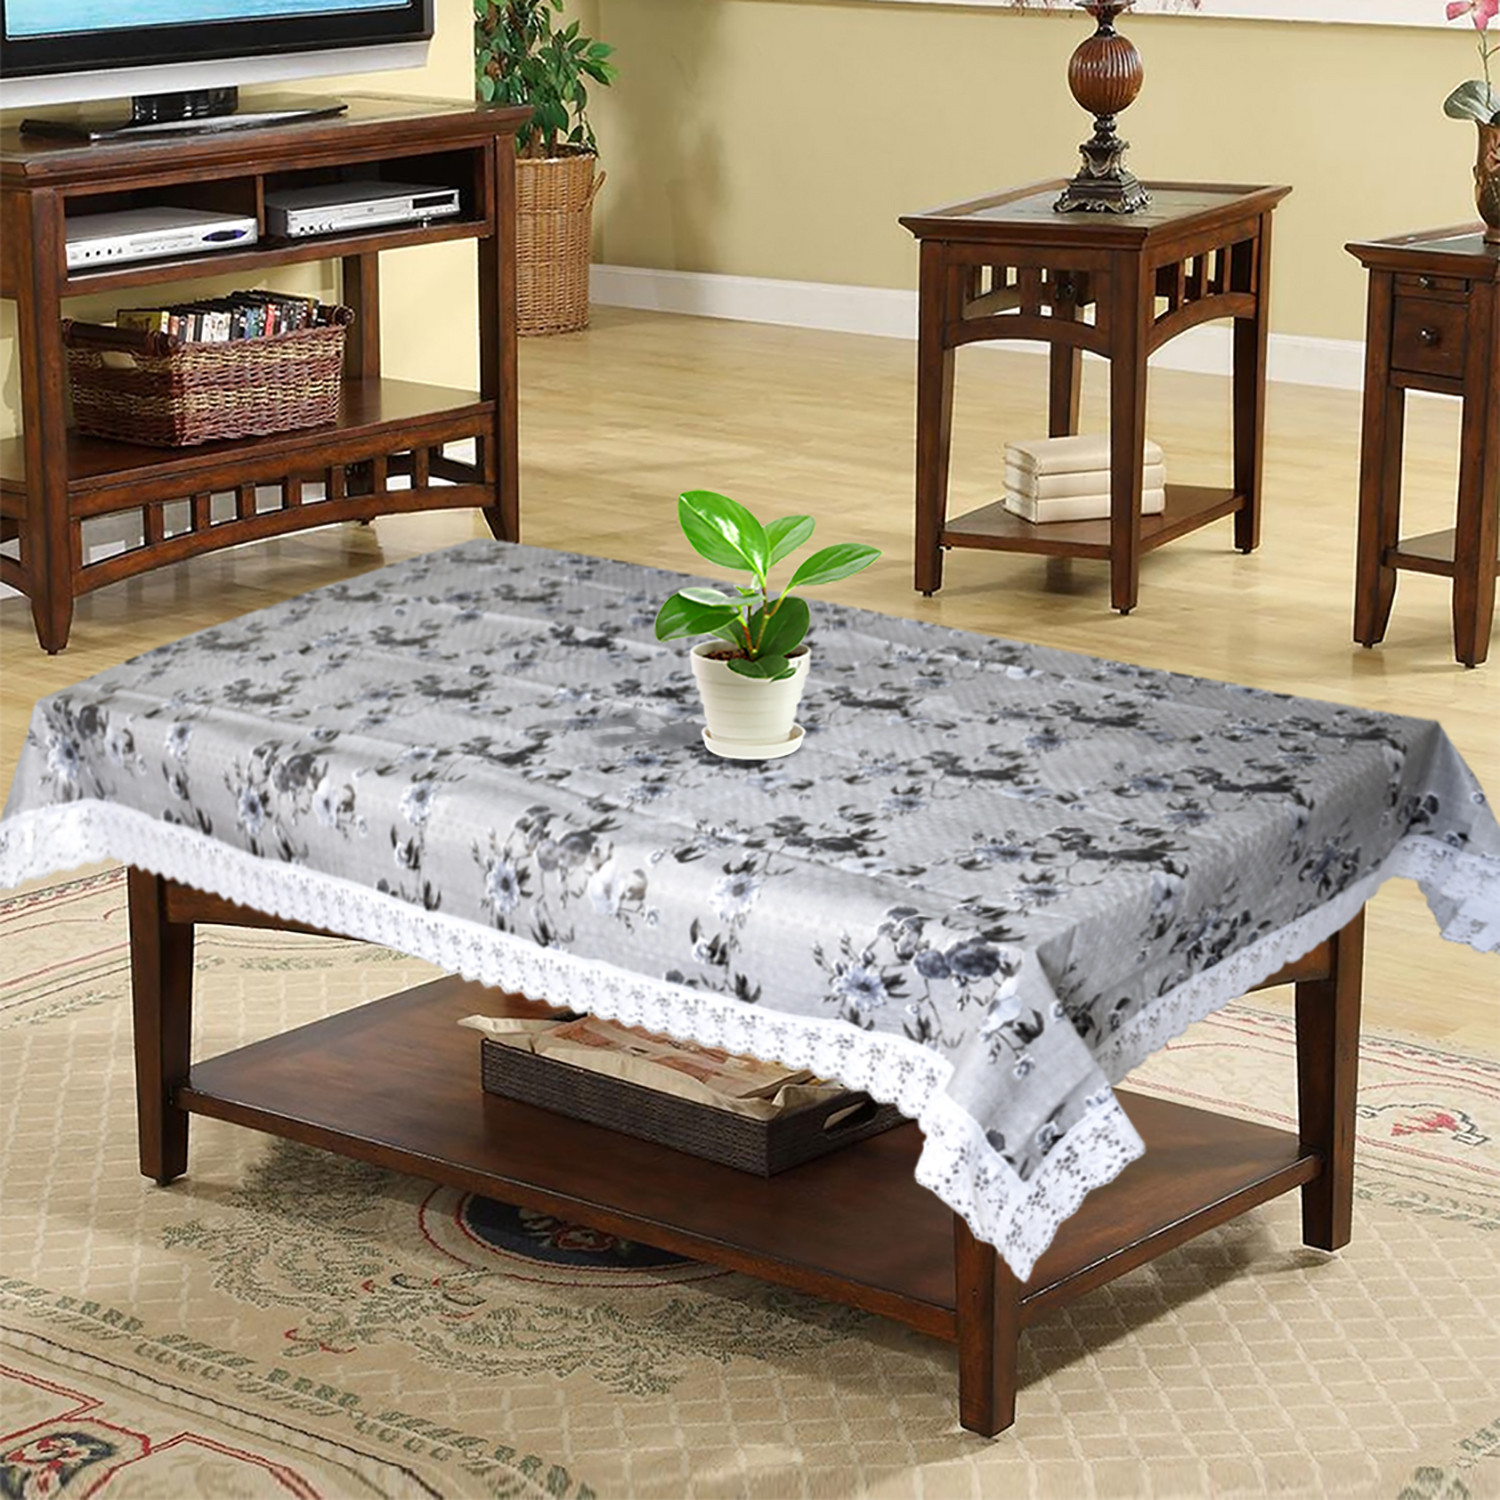 Kuber Industries Flower Printed PVC 4 Seater Center Table Cover, Protector With White Lace Border, 40